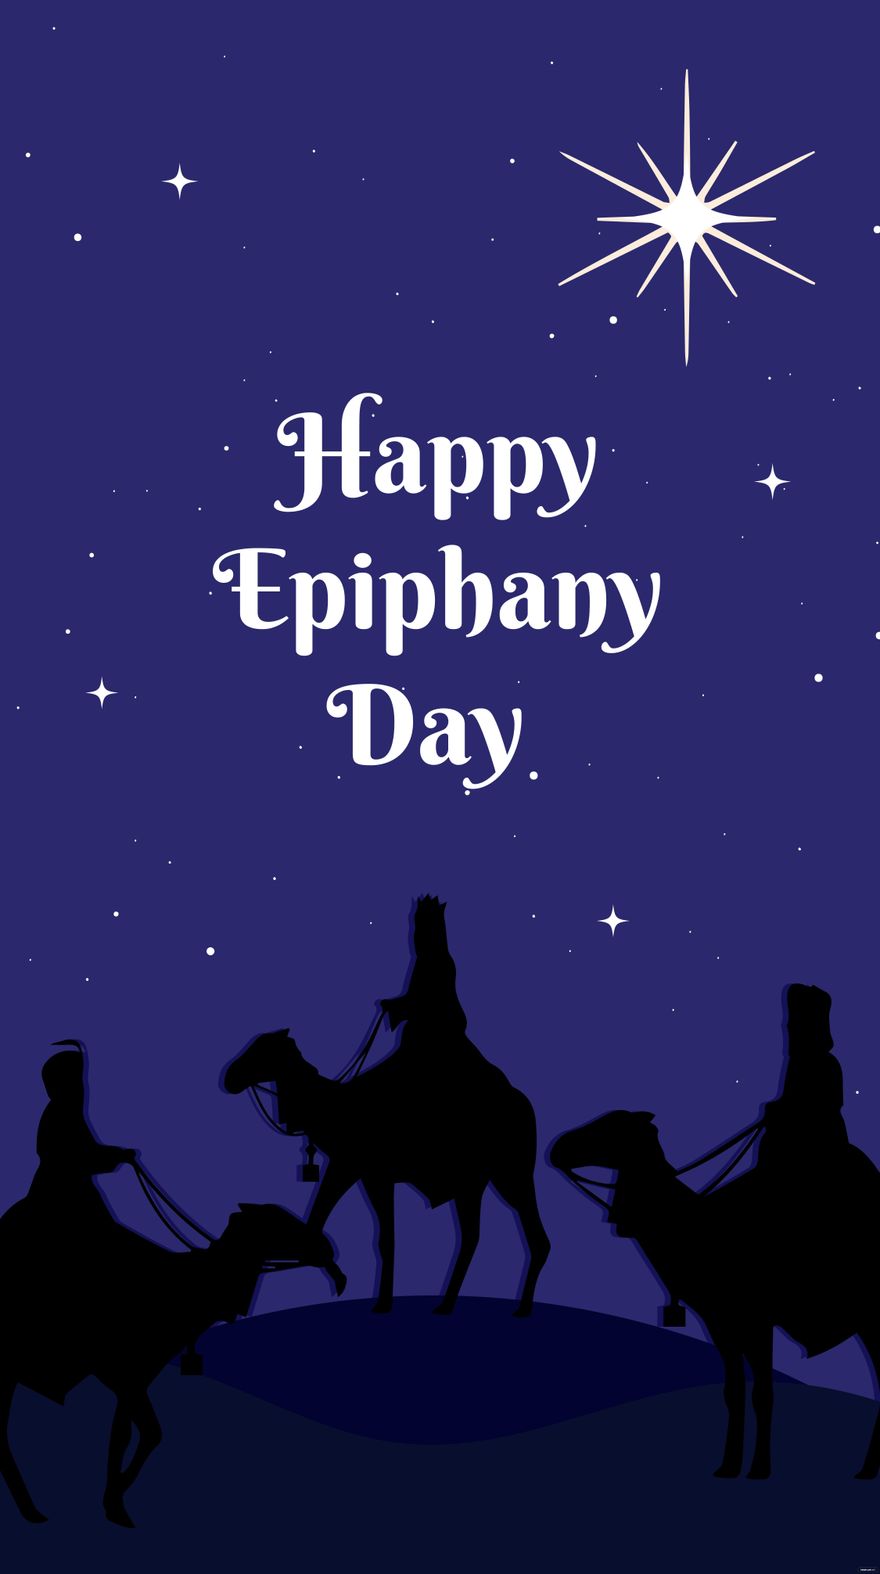 Free Epiphany Day iPhone Background in PDF, Illustrator, PSD, EPS, SVG, PNG, JPEG